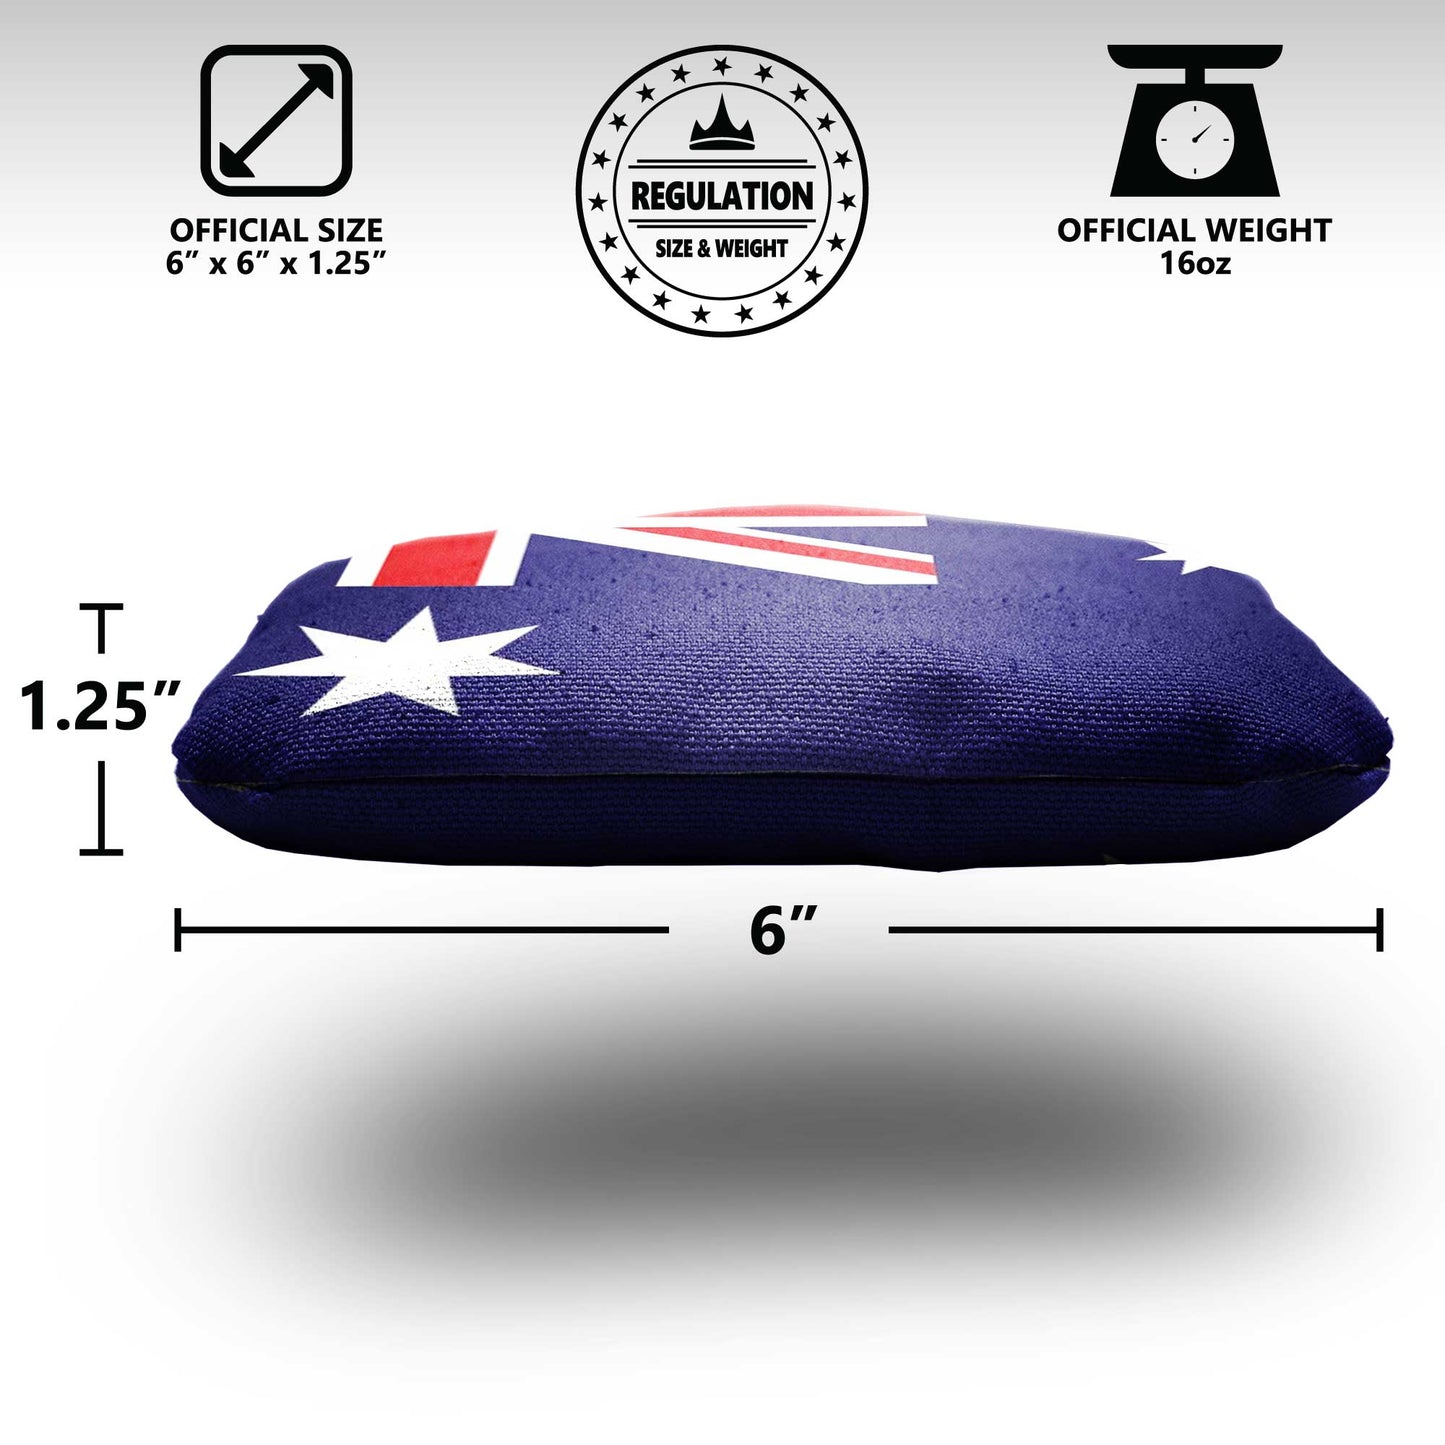 The Aussies and Mericas - 8 Cornhole Bags